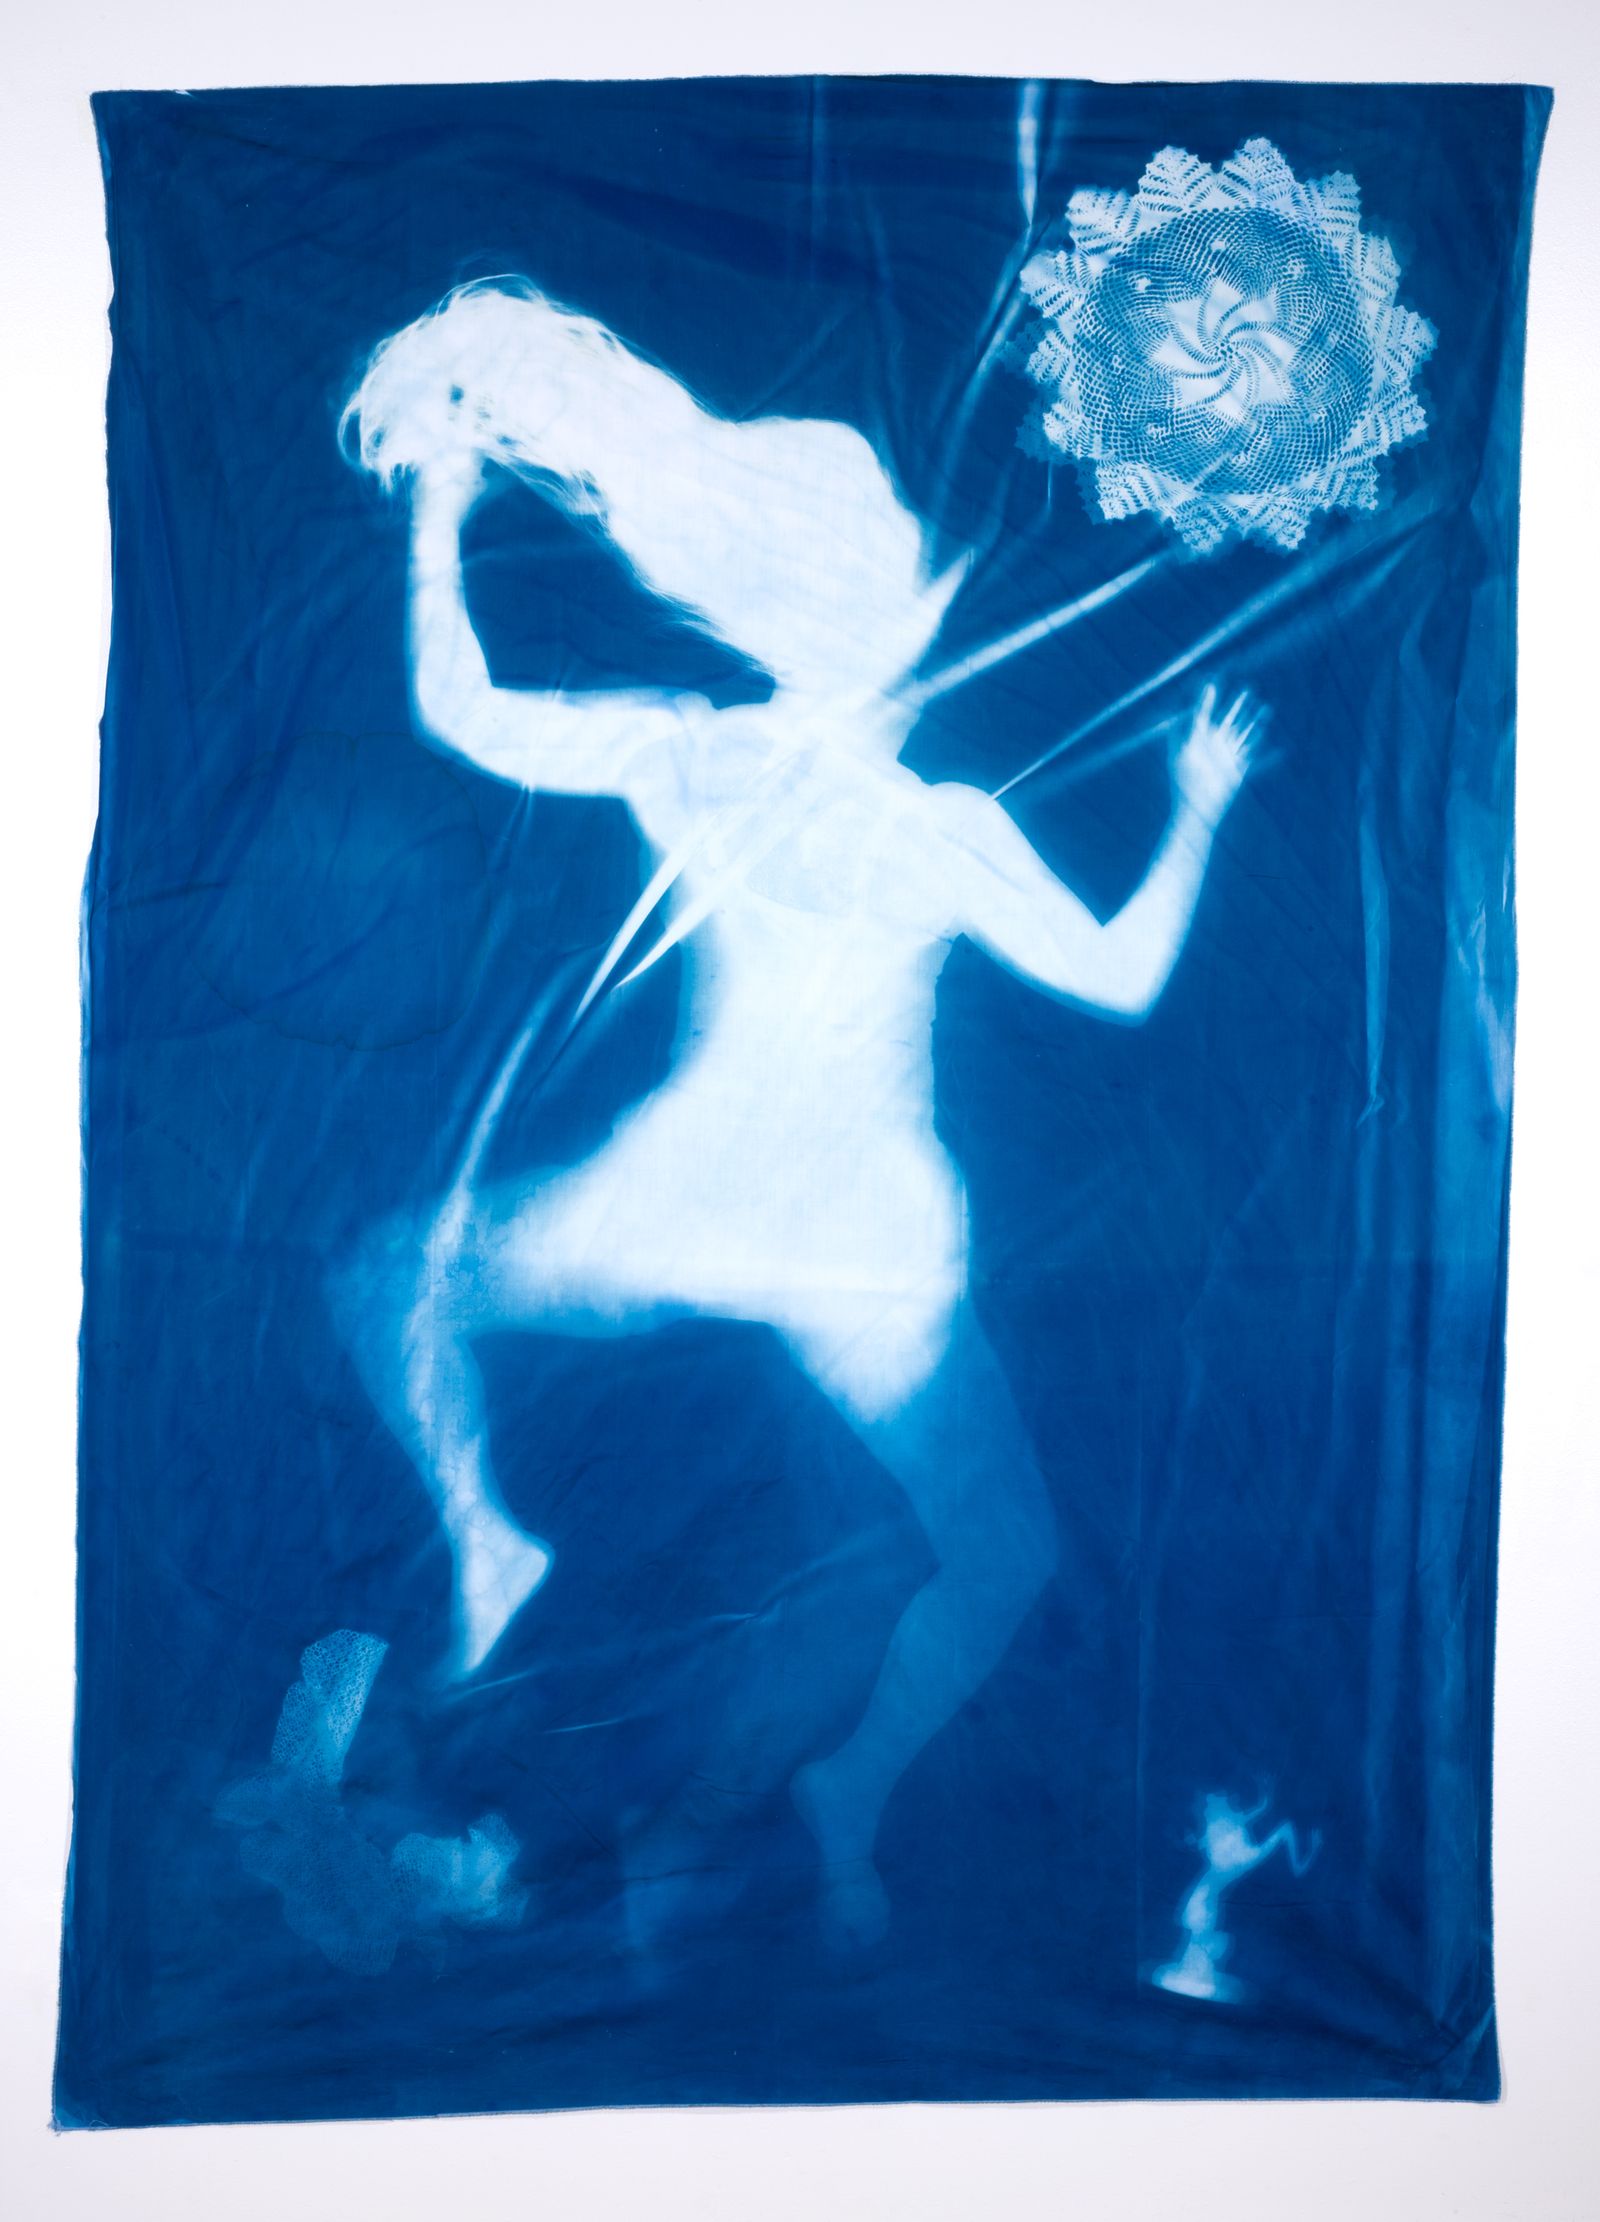 © Jackie Neale - Crossing Over: Immigration Stories, 2017 Cotton fabric cyanotype portraits 5x7ft